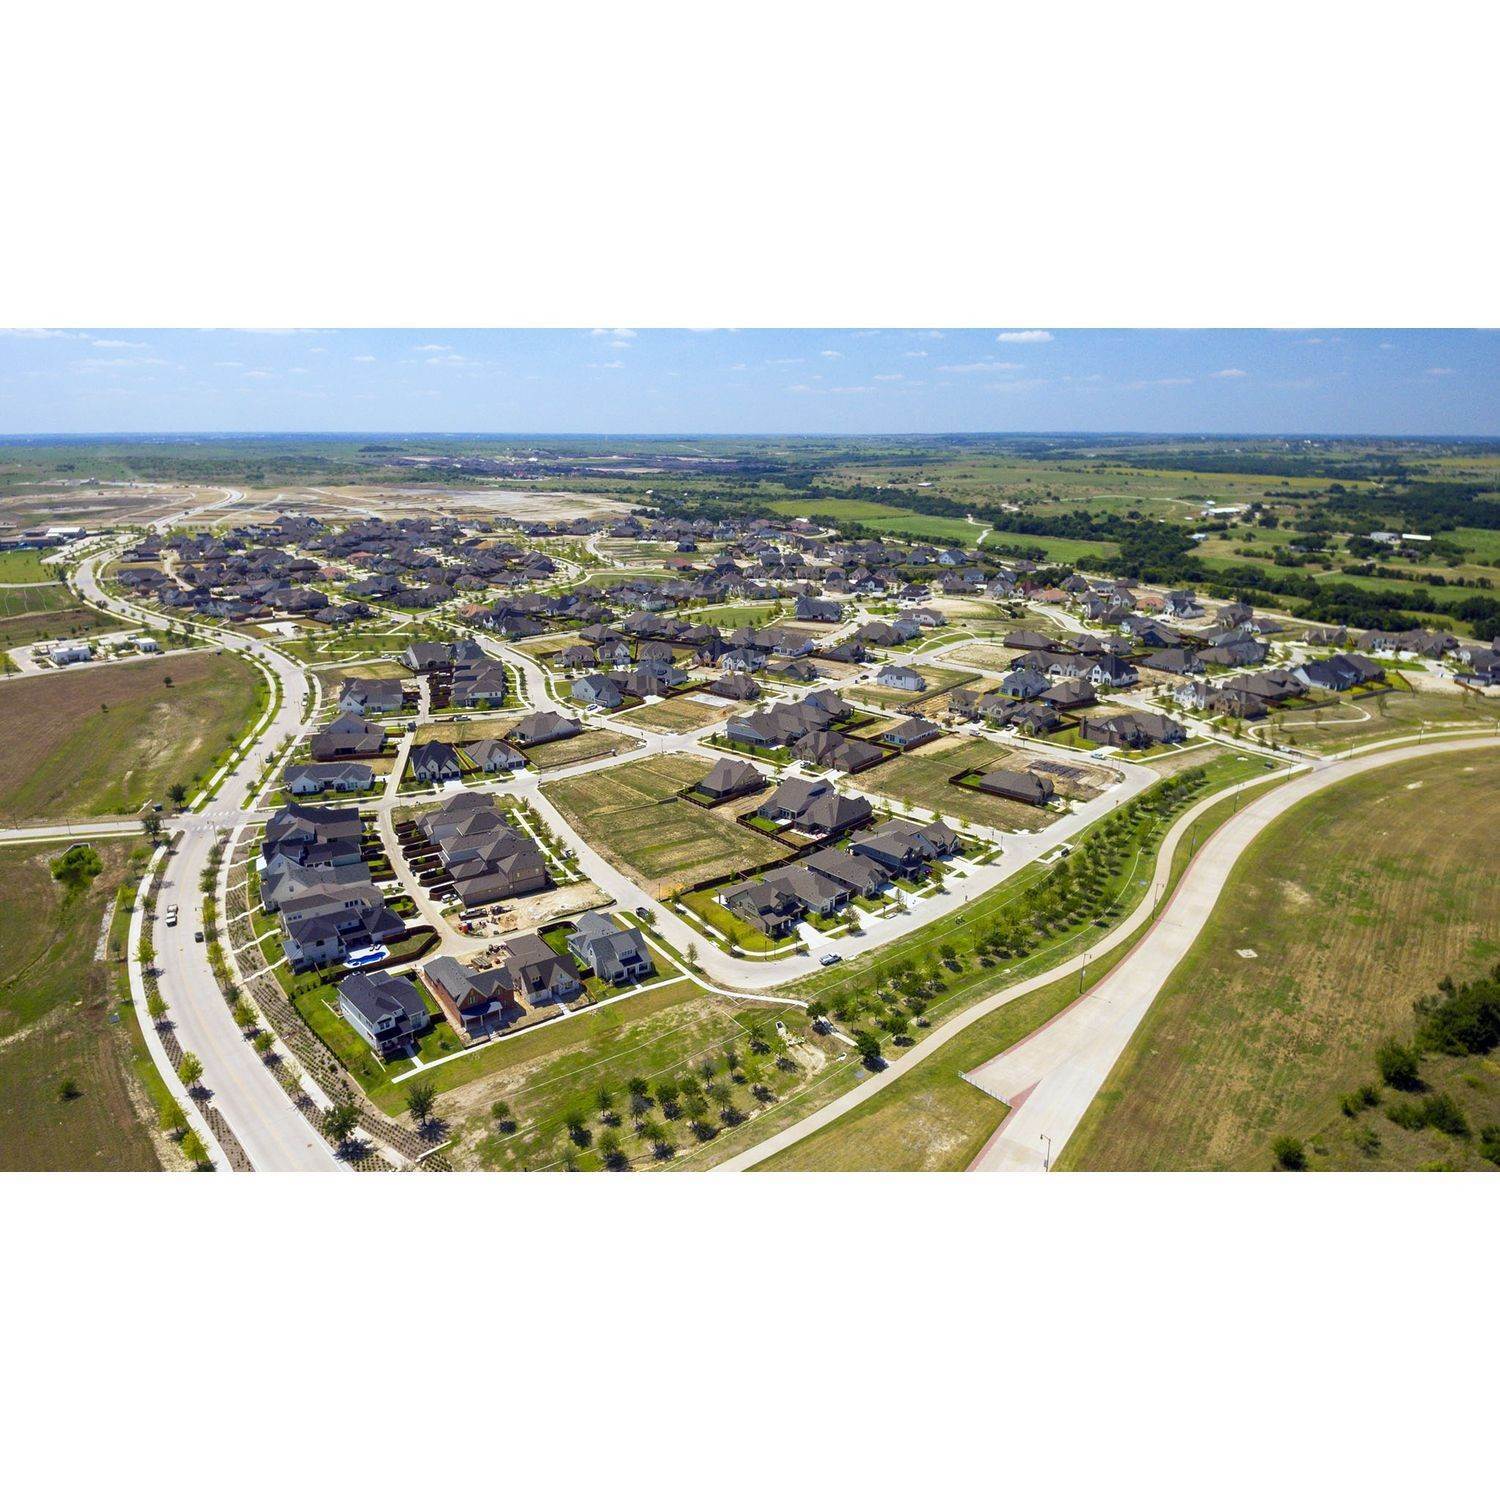 11. Walsh Townhomes building at 13456 Meadow Cross Drive, Aledo, TX 76008